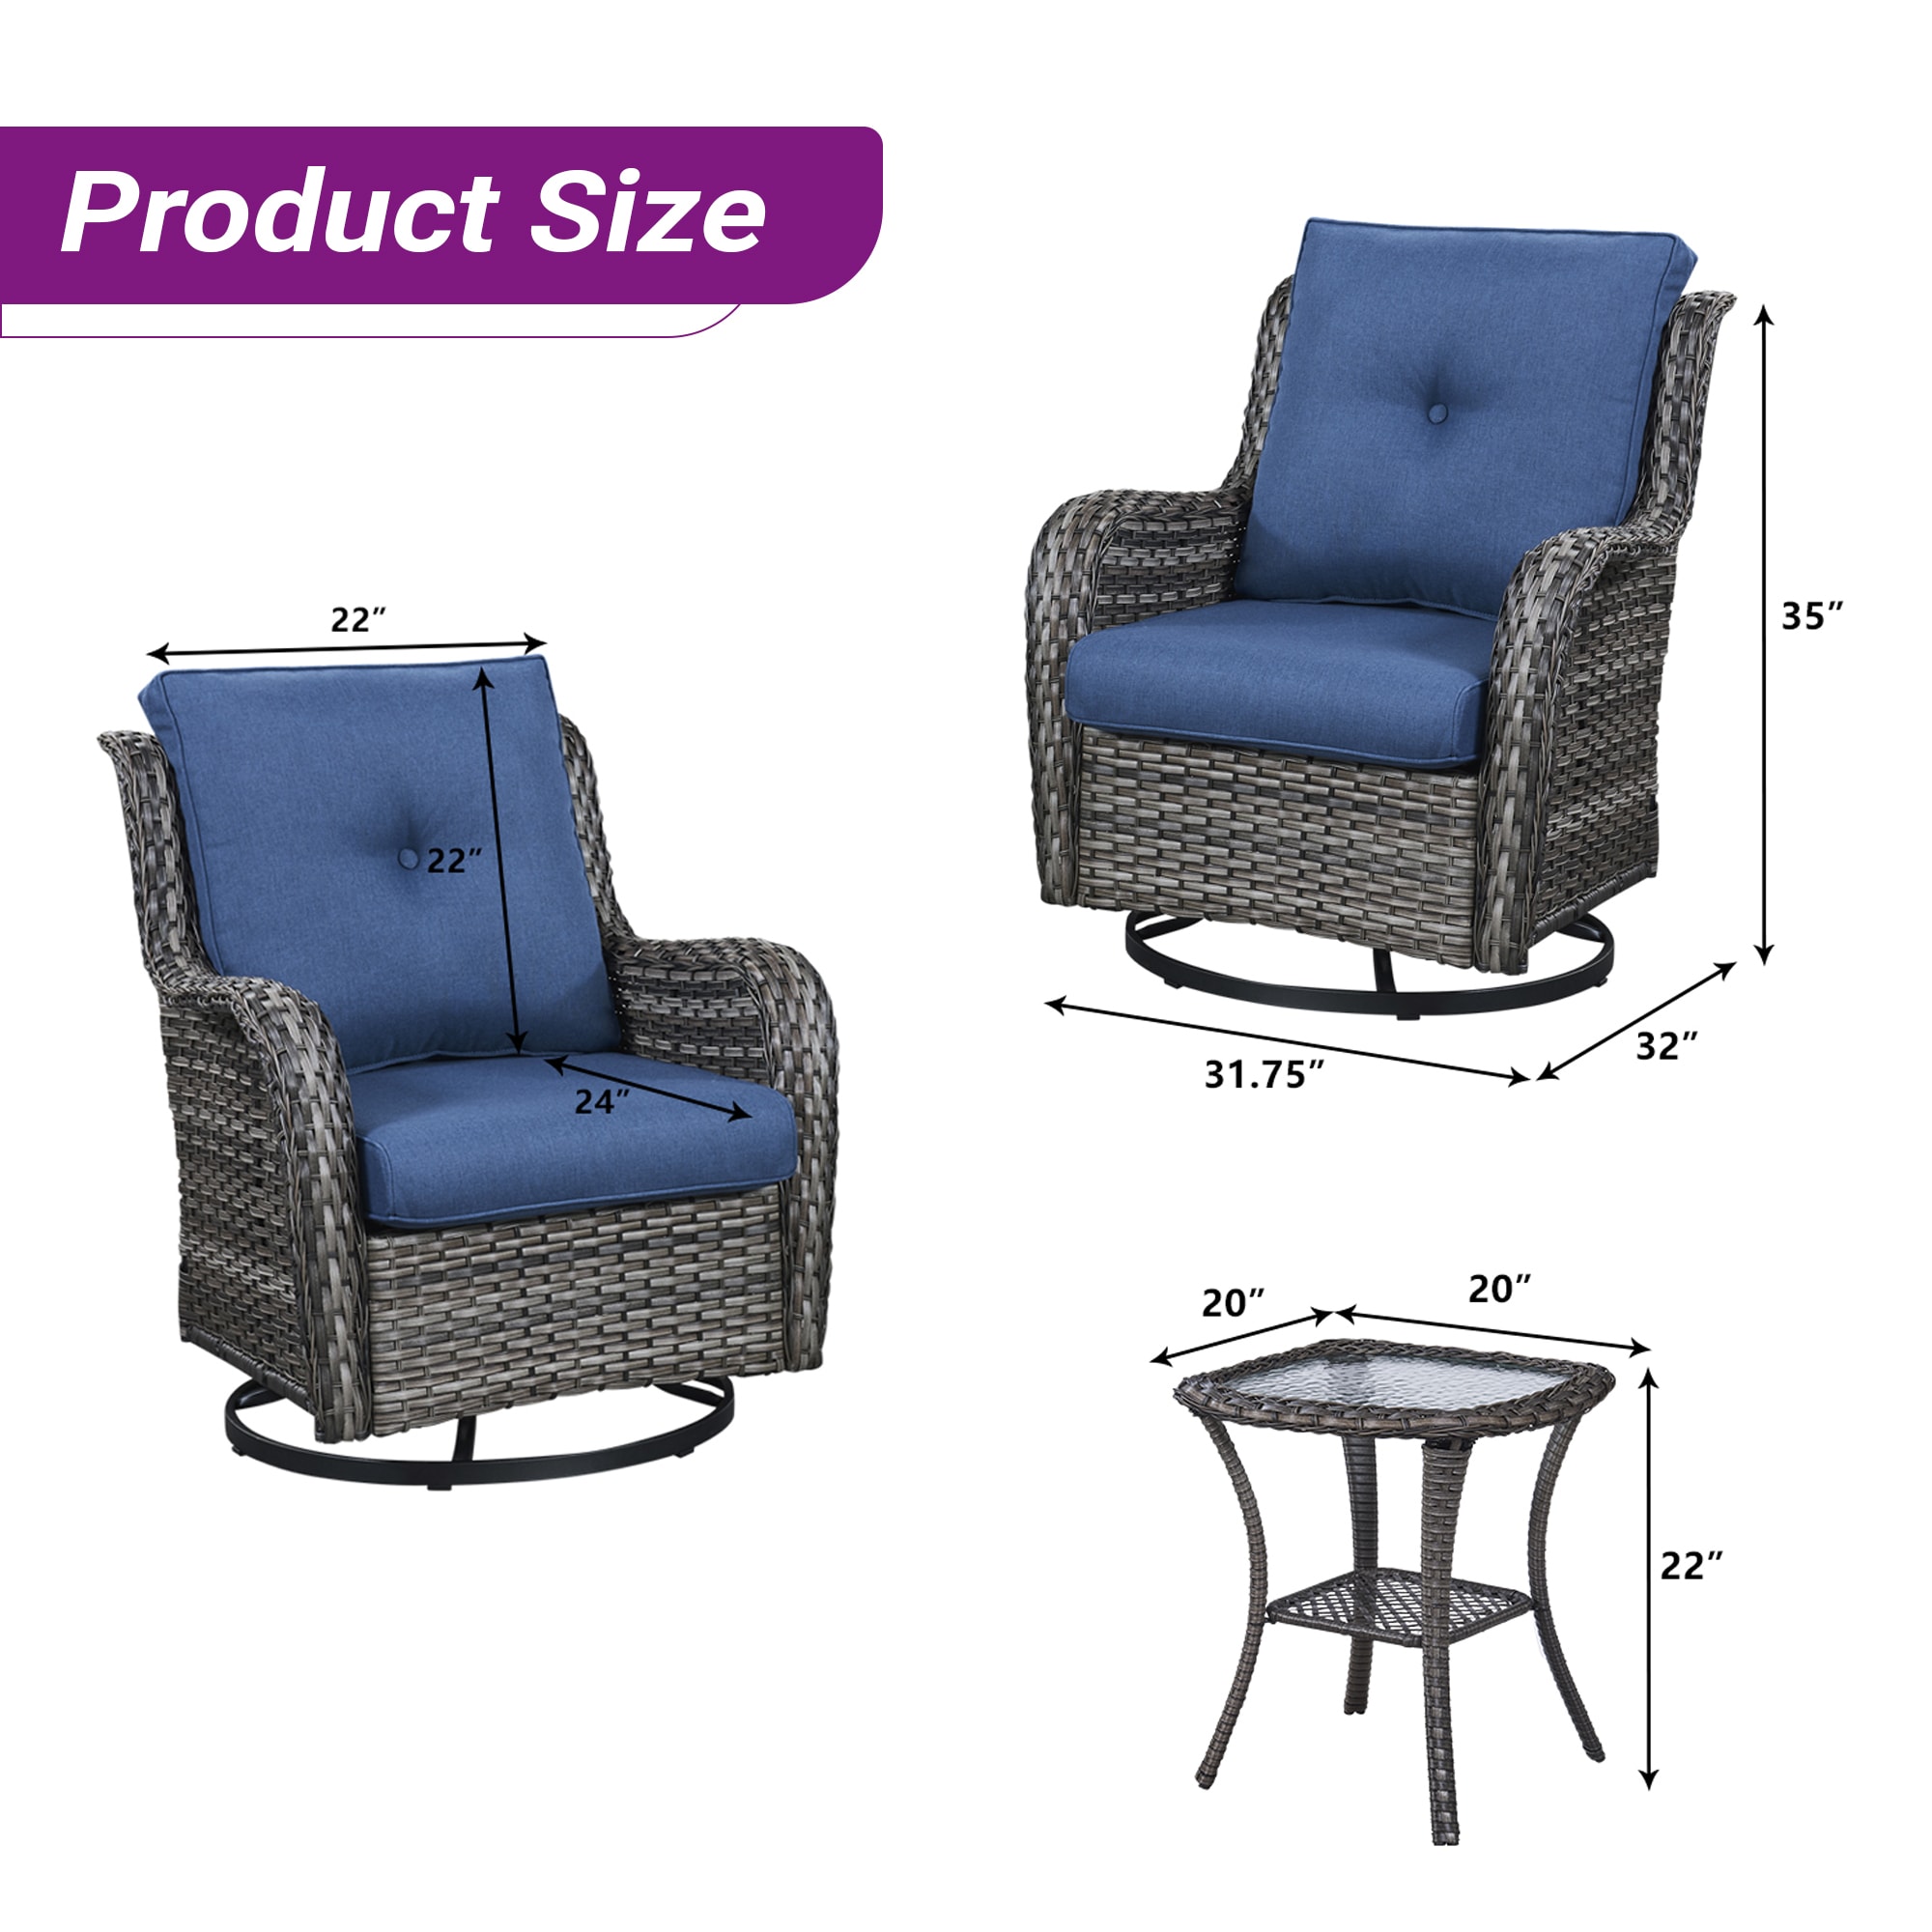 Rilyson 2PCS Swivel Patio Wicker Chairs with Side Table in the Patio ...